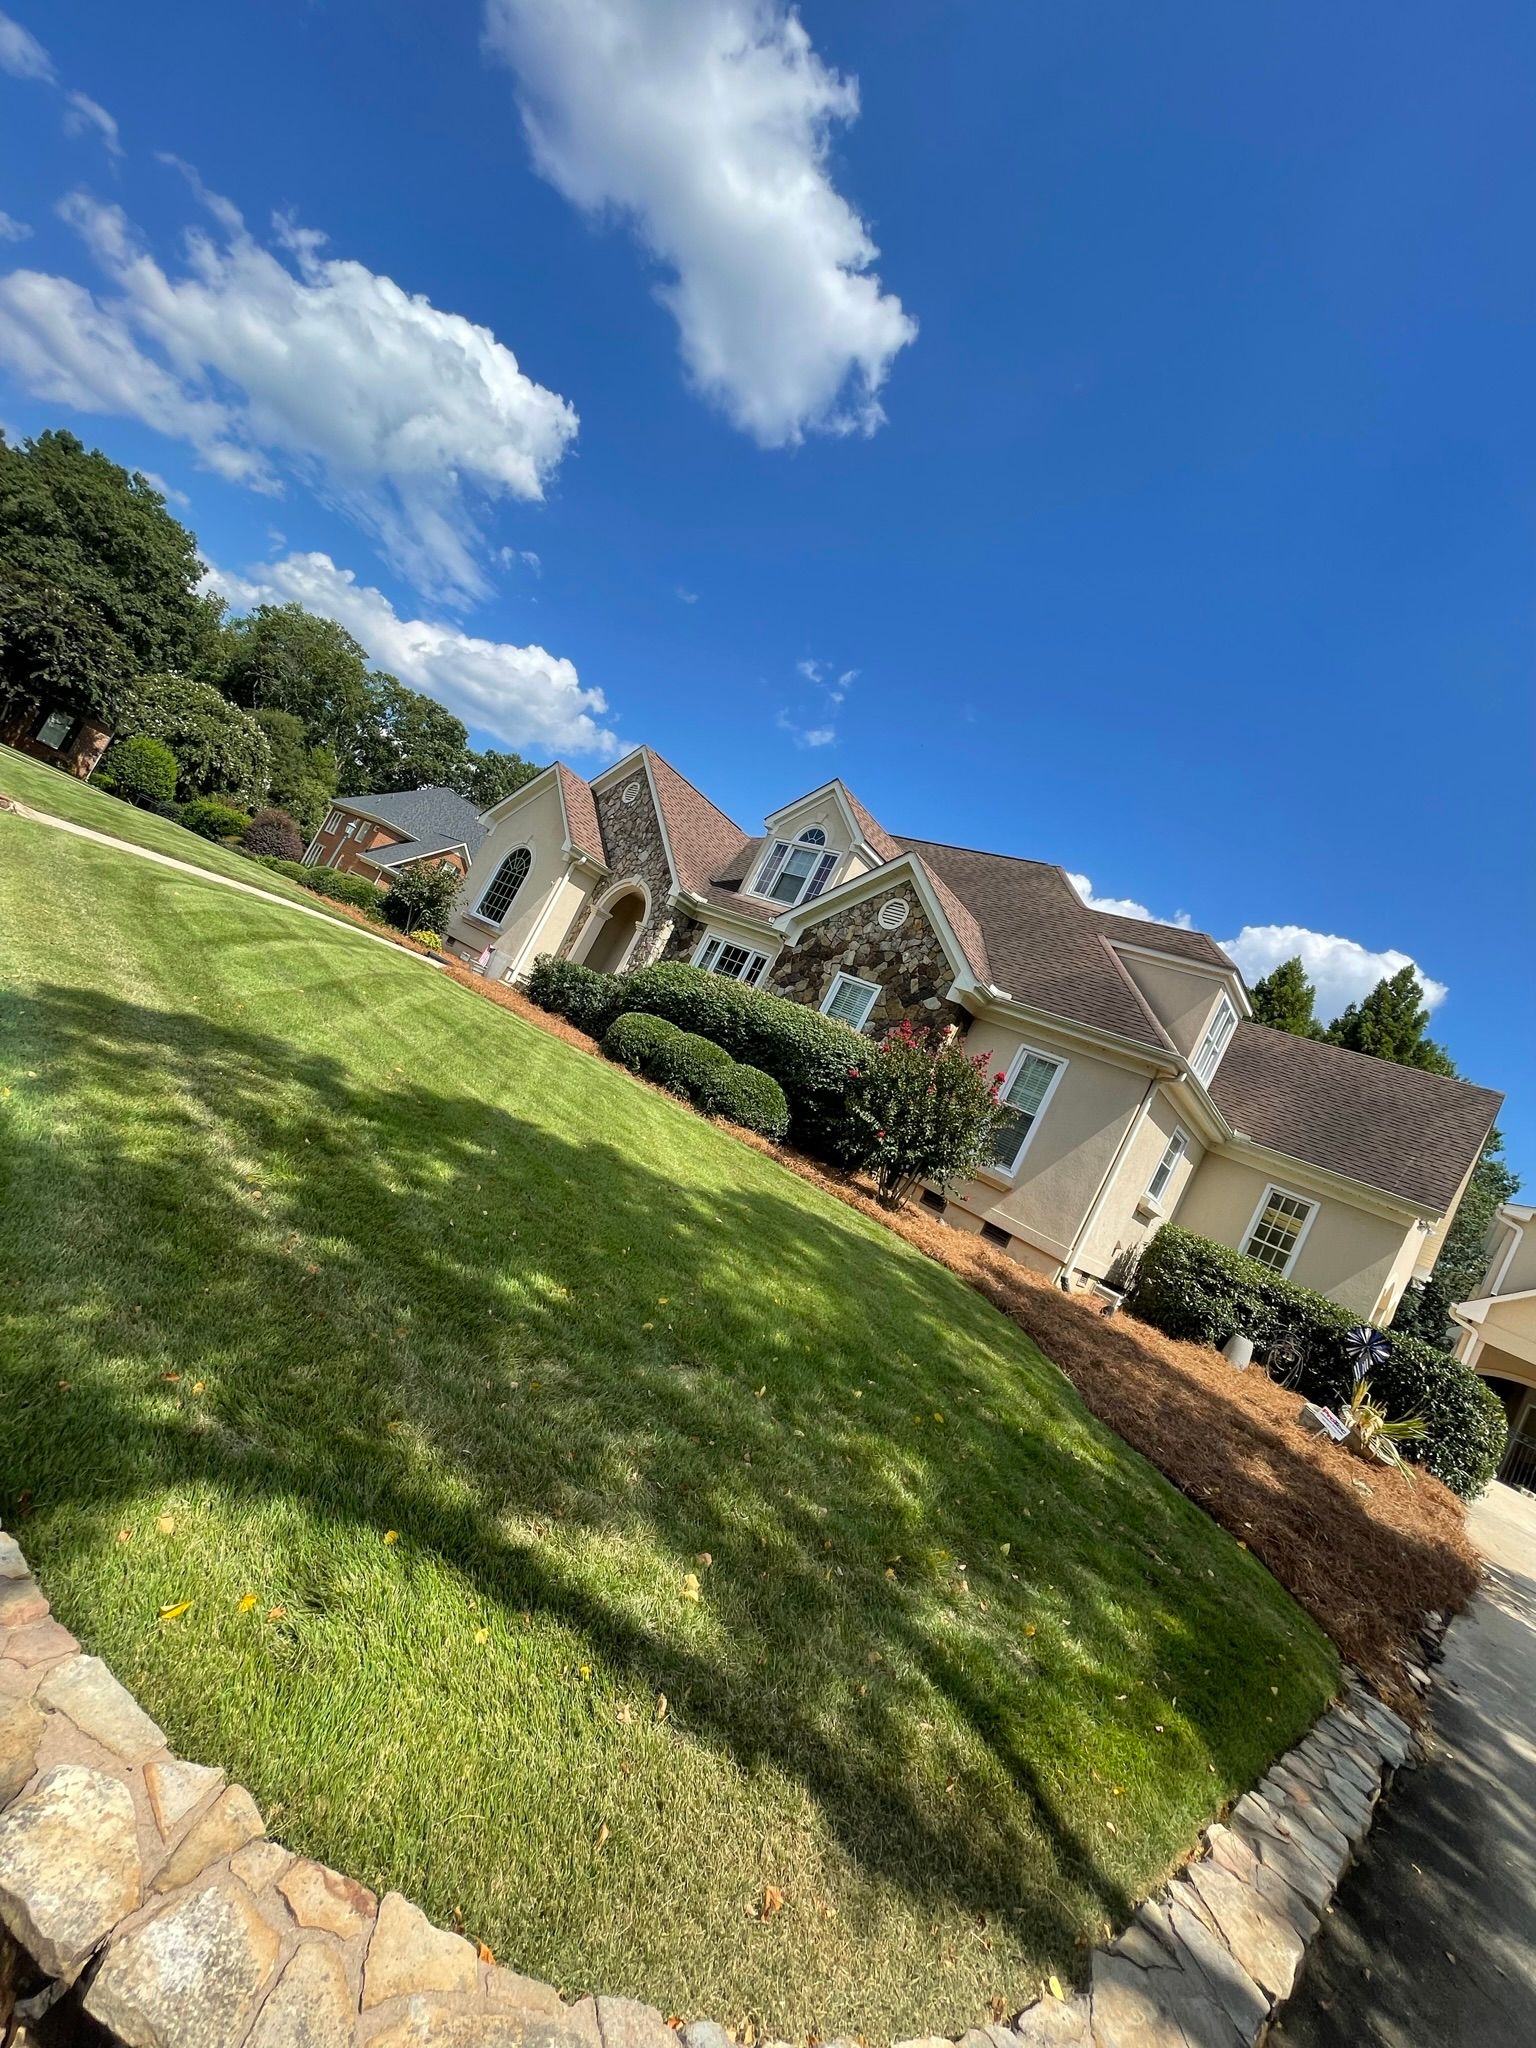 All Photos for Sunrise Lawn Care & Weed Control LLC in Simpsonville, SC